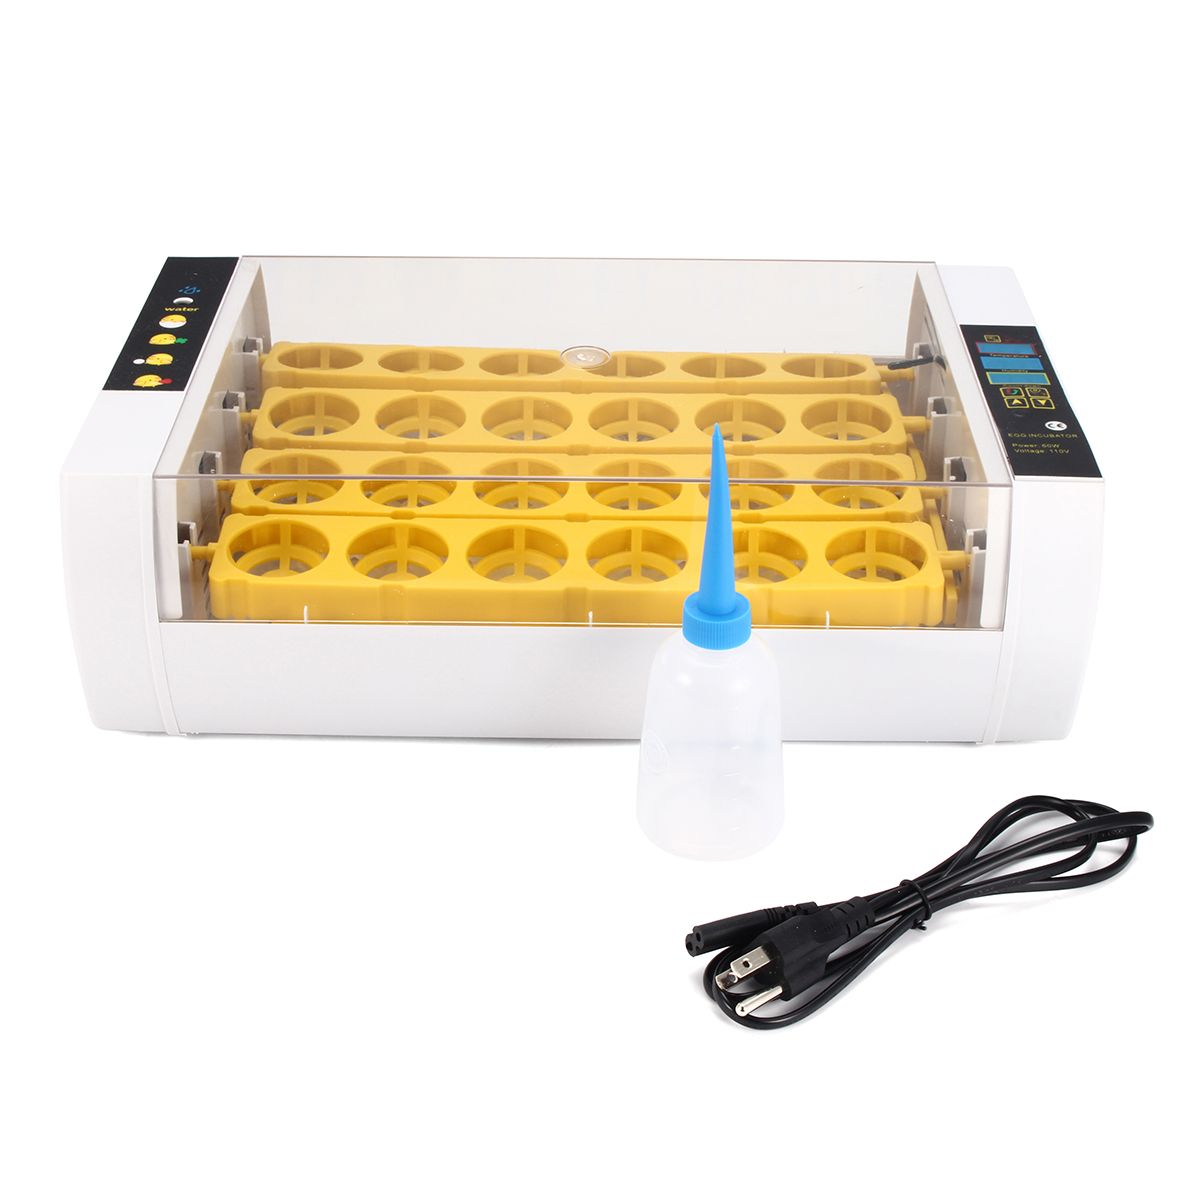 80W-24-Position-Digital-Mini-Fully-Automatic-Poultry-Incubator-Eggs-Poultry-Hatcher-USEU-Plug-1263232